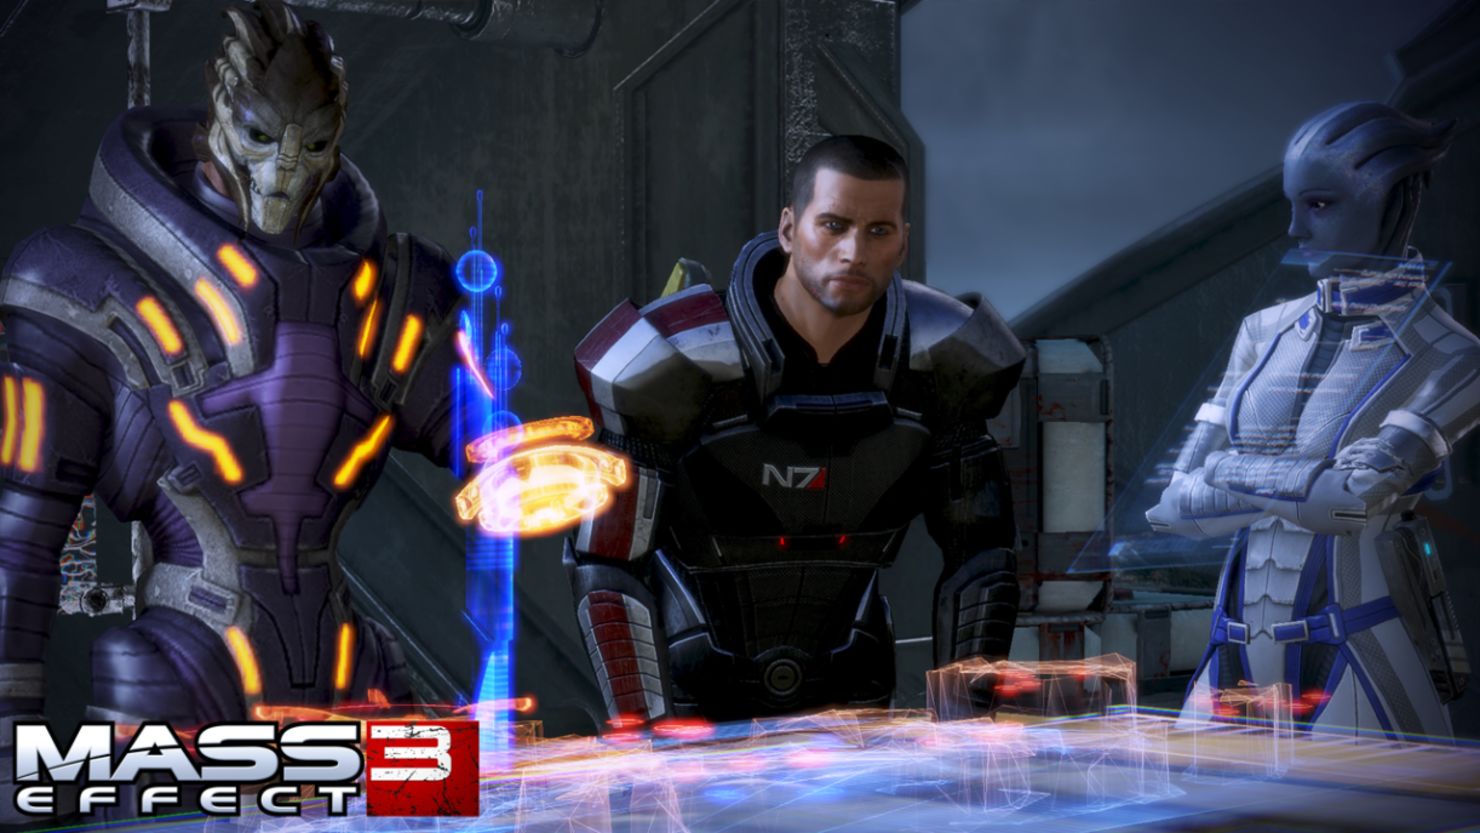 The creation of "Mass Effect 3" pushed a team of developers to the limit, says Casey Hudson, executive producer of the series.